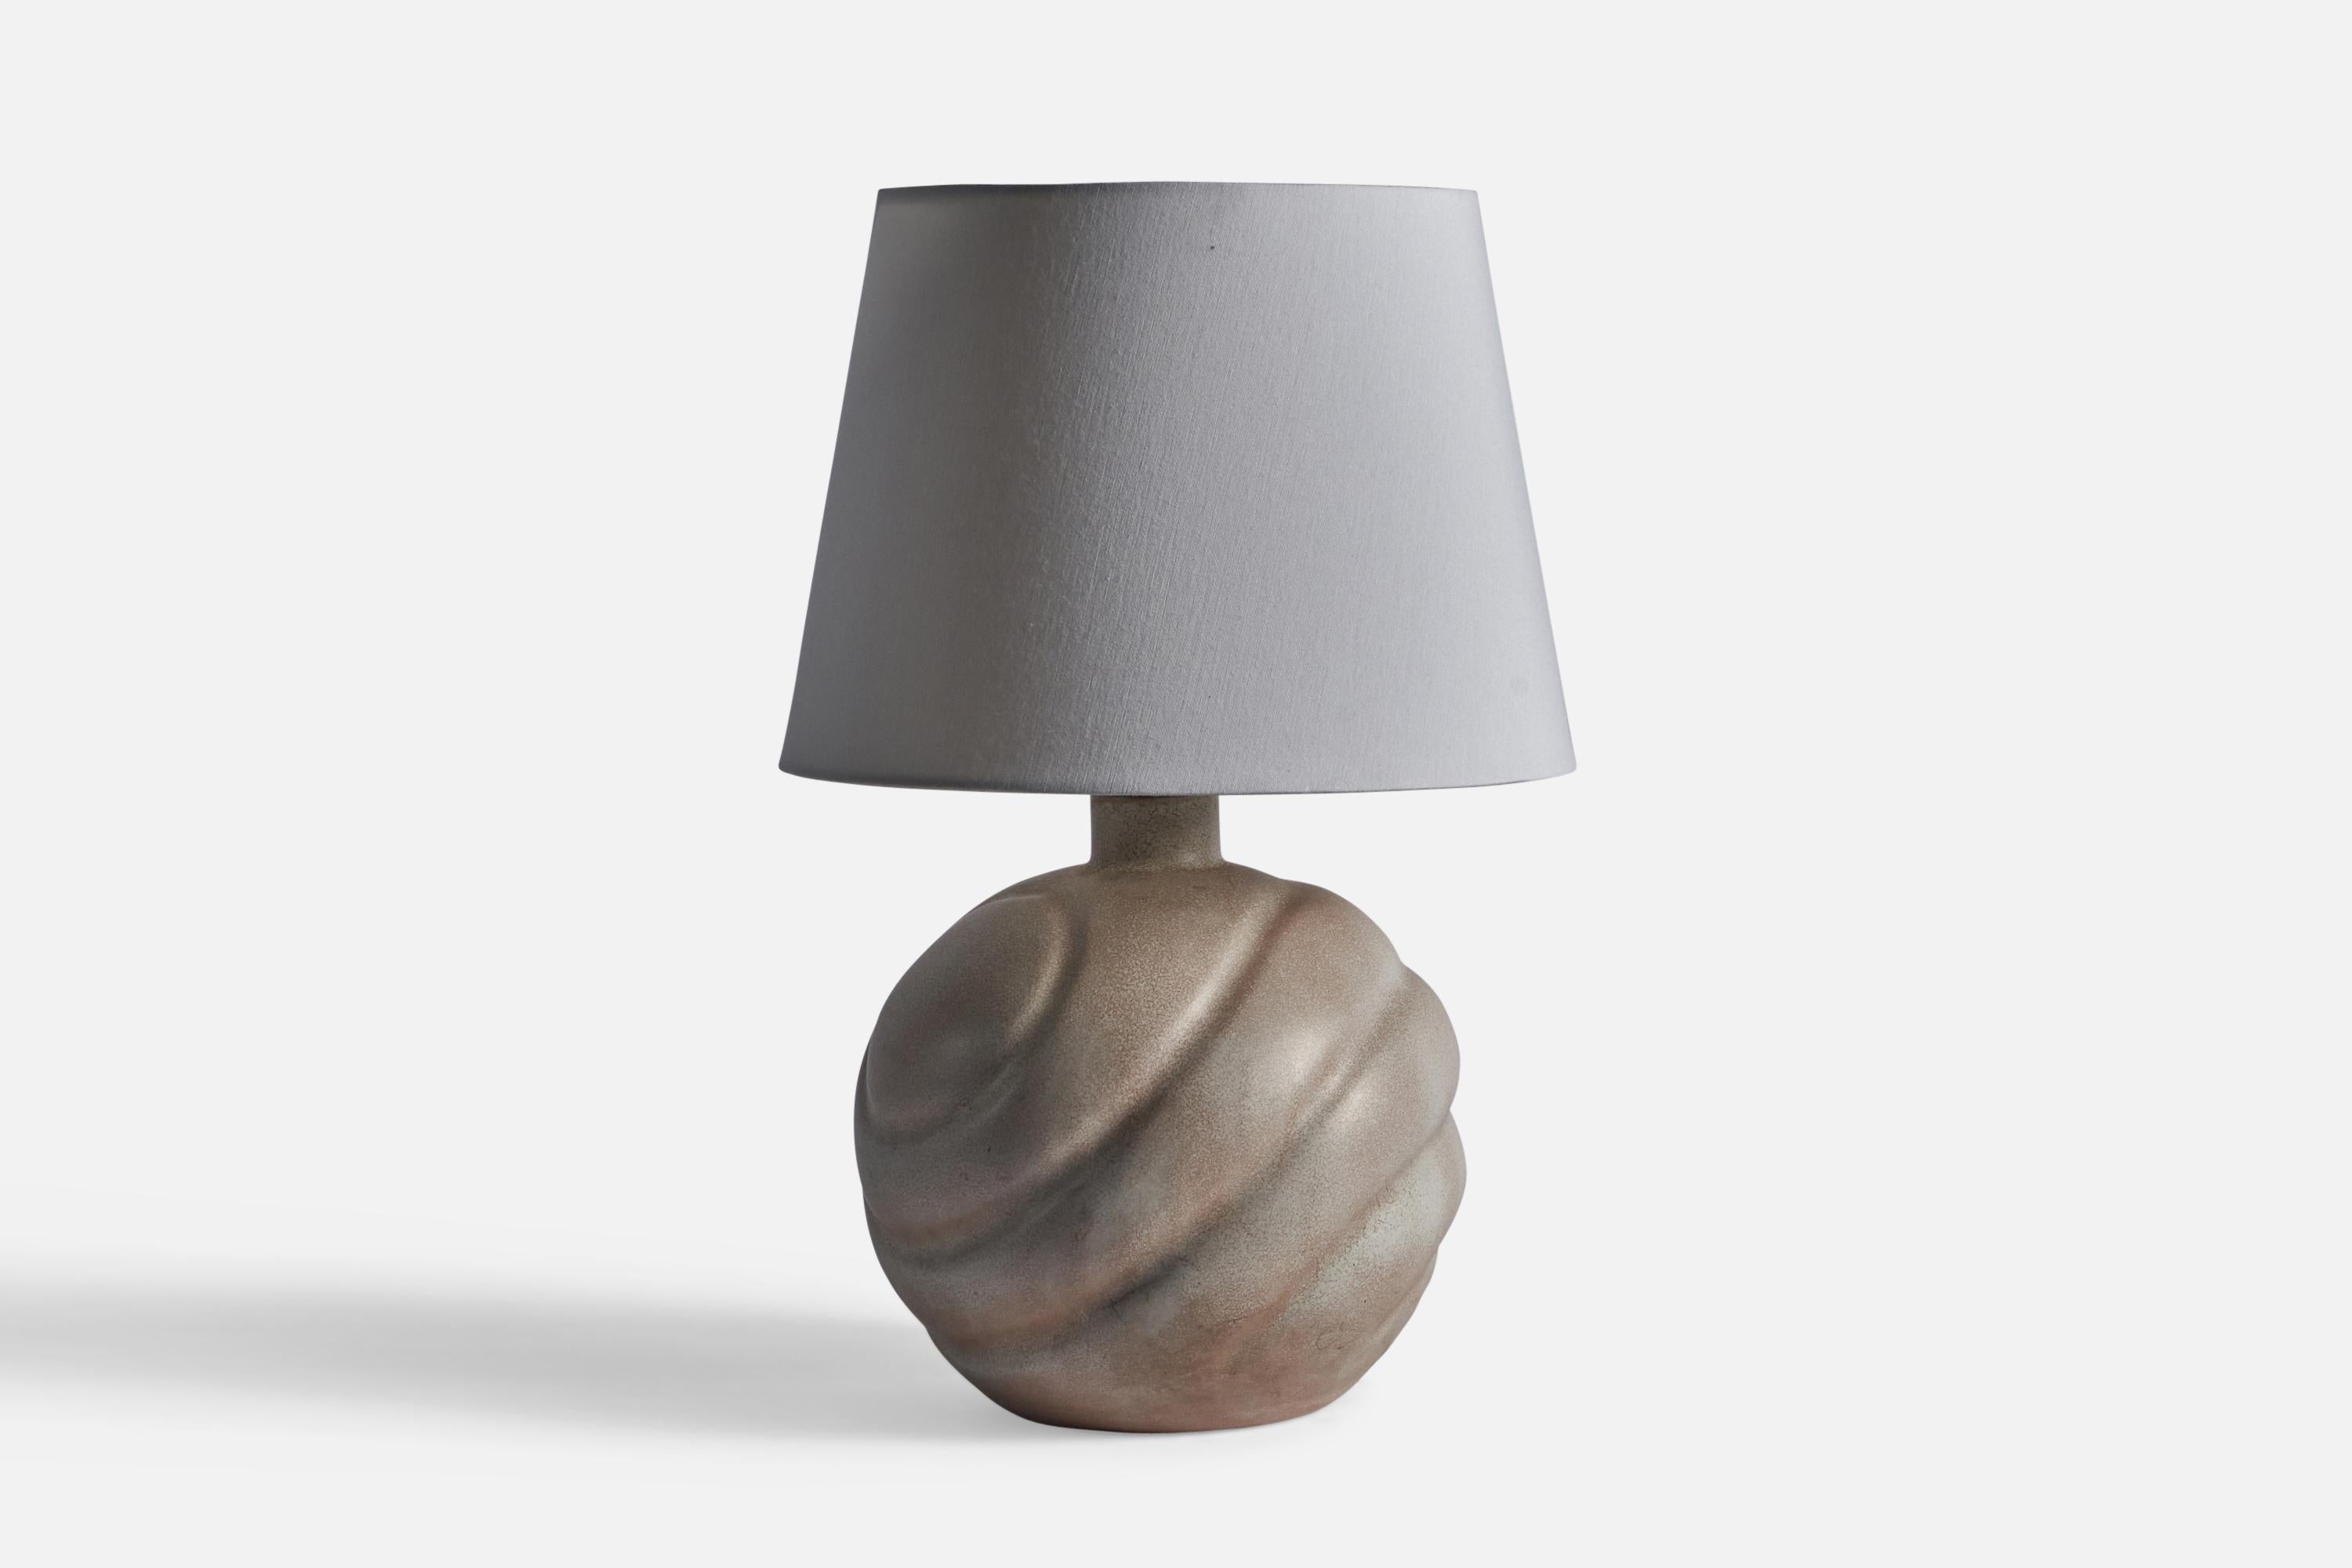 A grey-glazed earthenware and brass table lamp, designed and produced by Upsala Ekeby, Sweden, 1930s.

Dimensions of Lamp (inches): 18.75